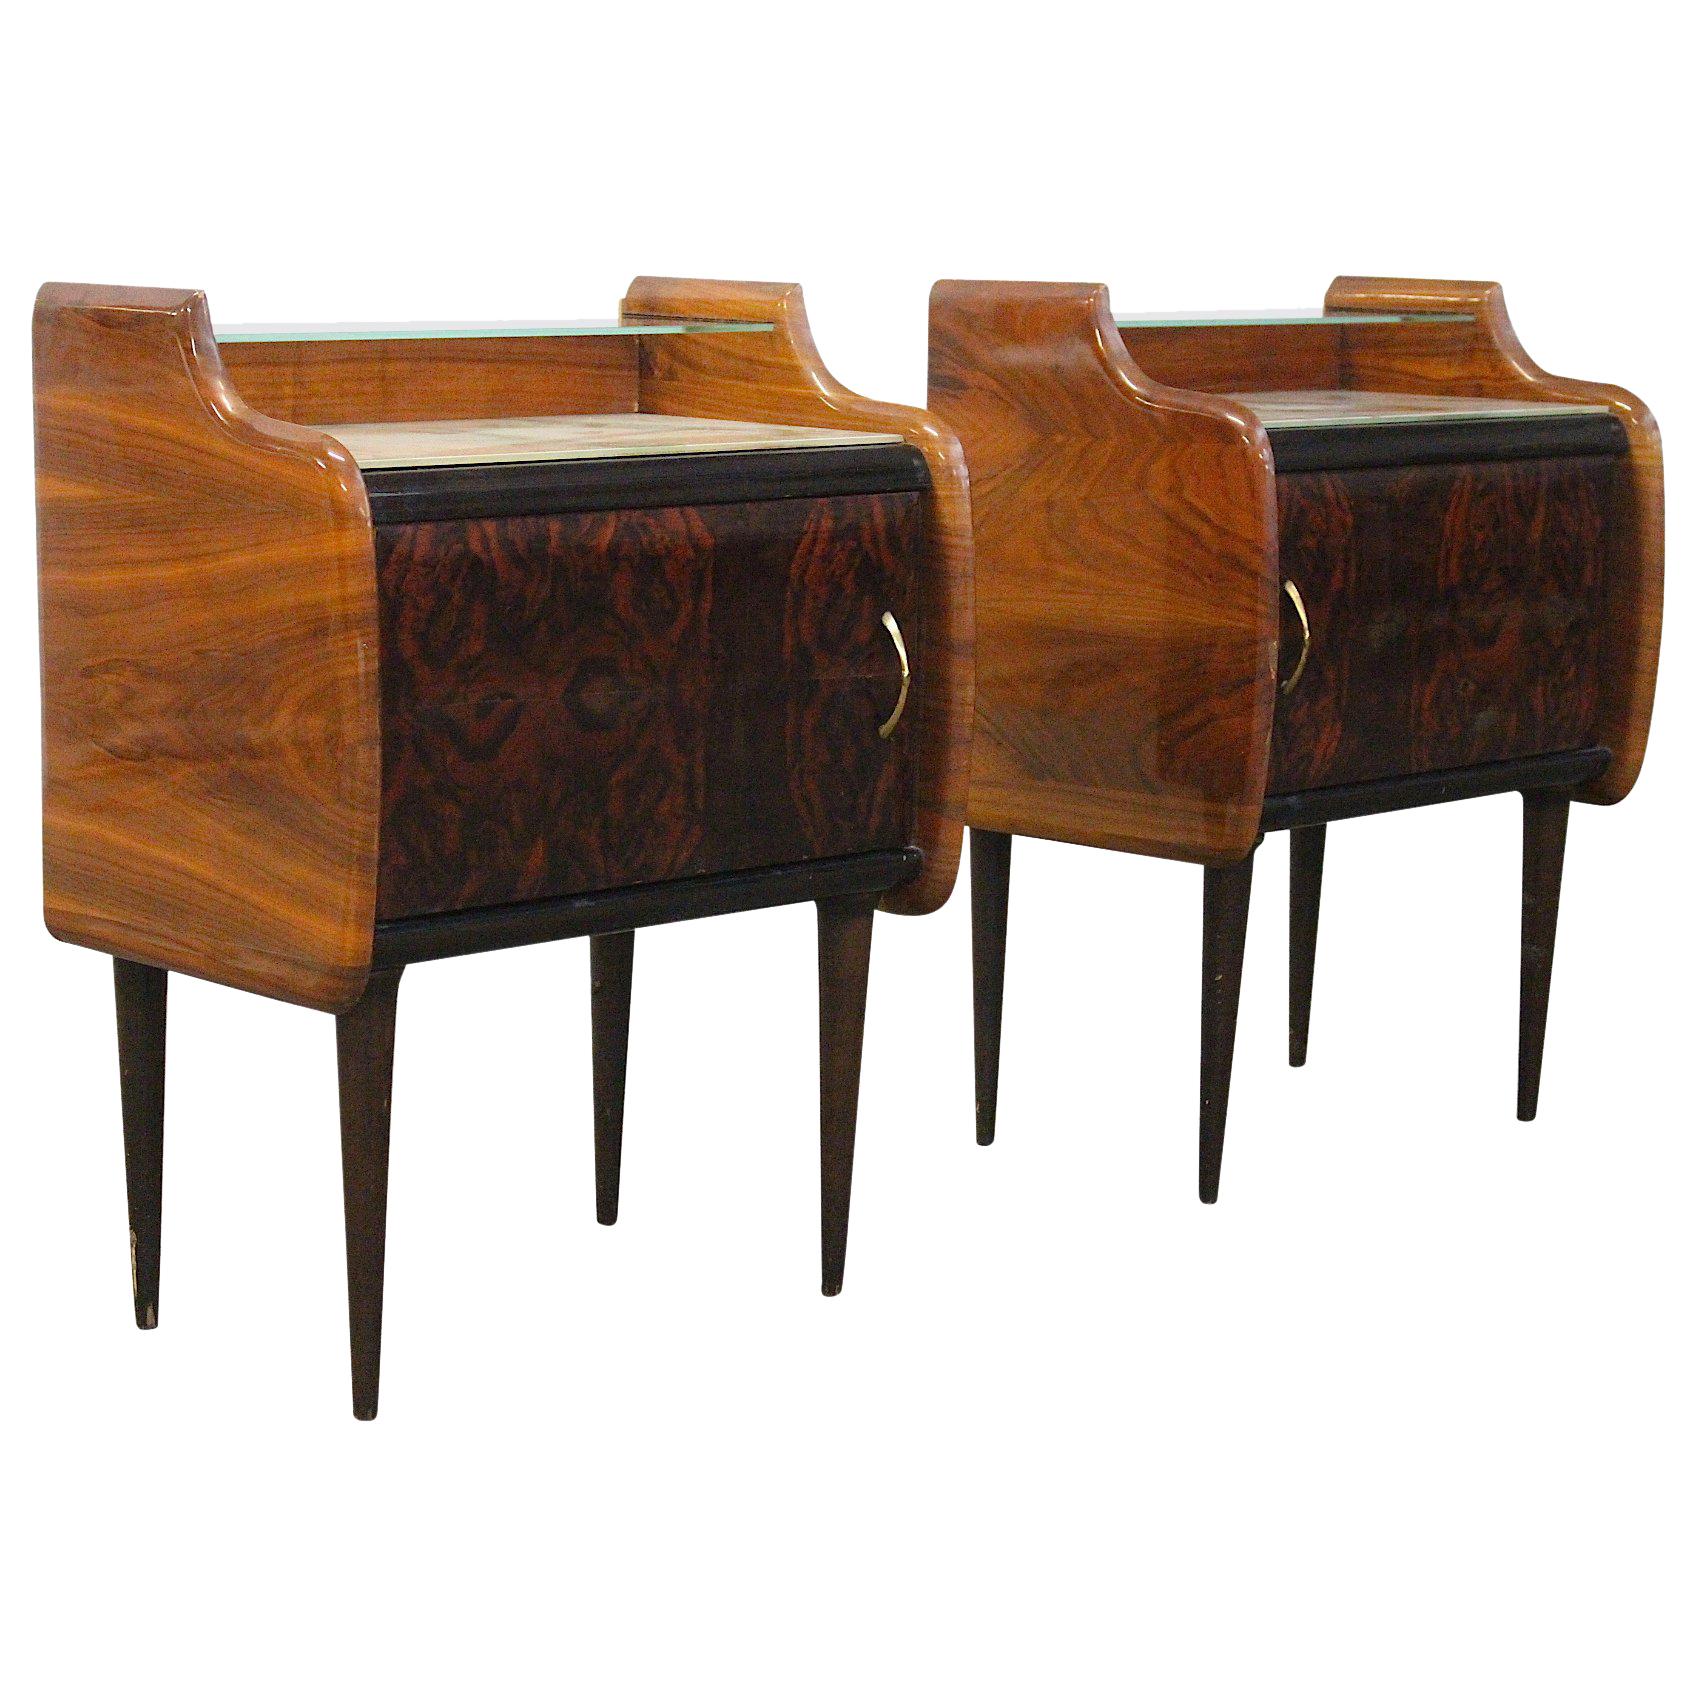 Pair of Two-Tiered Nightstands Attributed to Vittorio Dassi